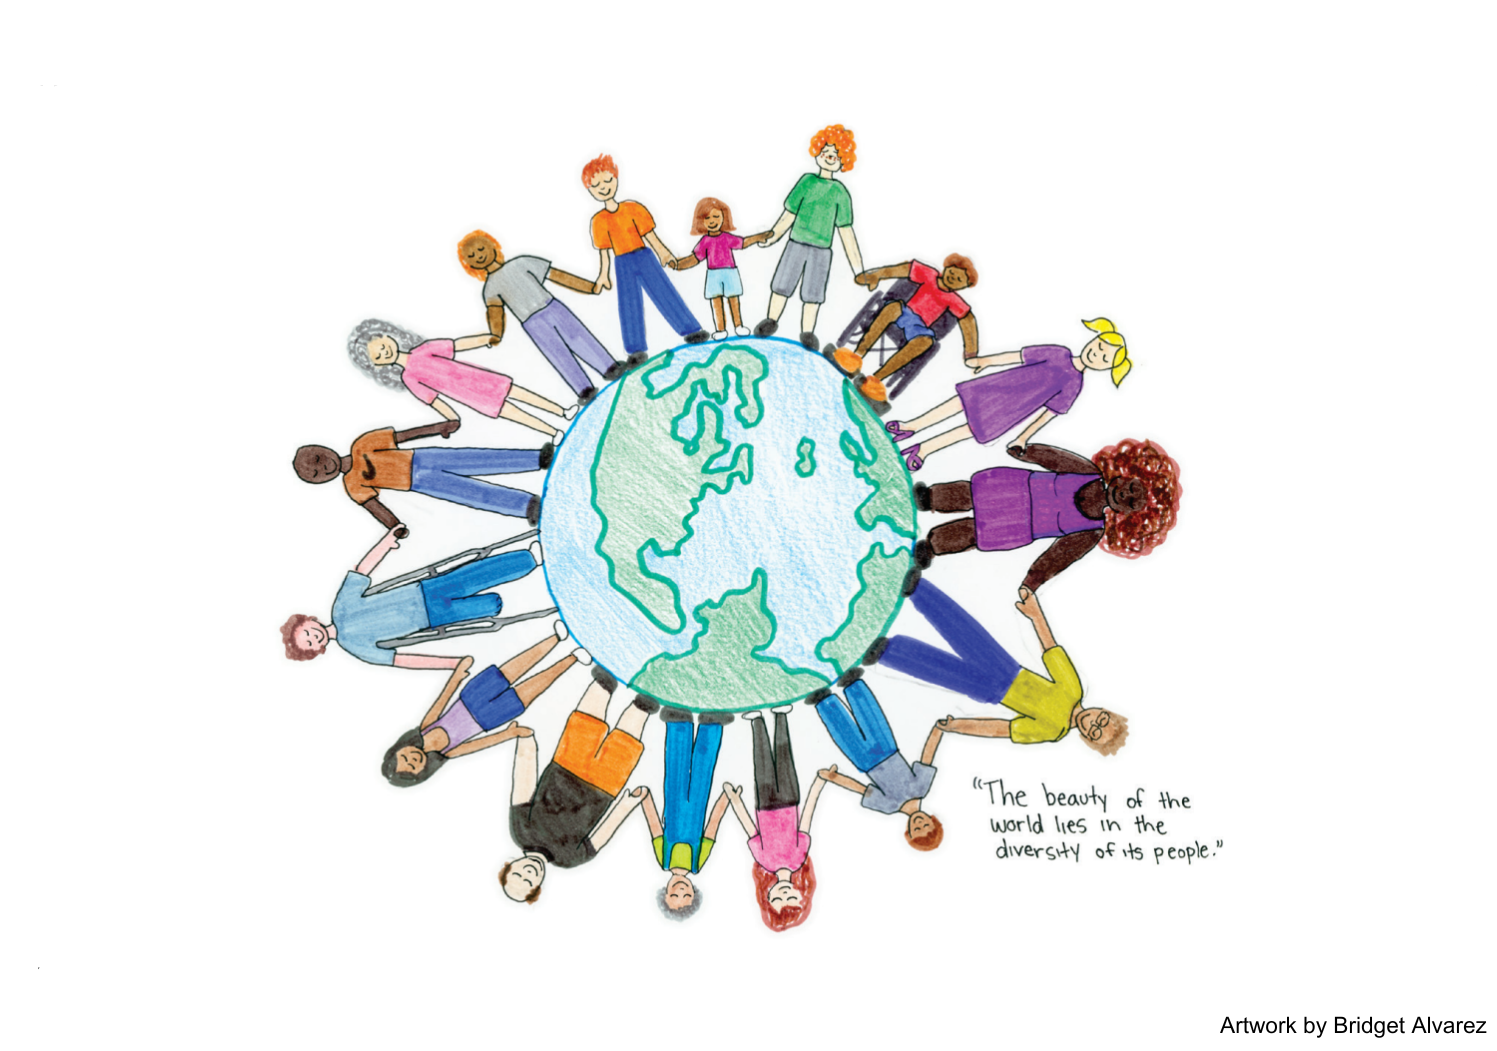 Drawing of a globe surrounded by drawings of individuals of all shapes, sizes, colors, and accessibility levels